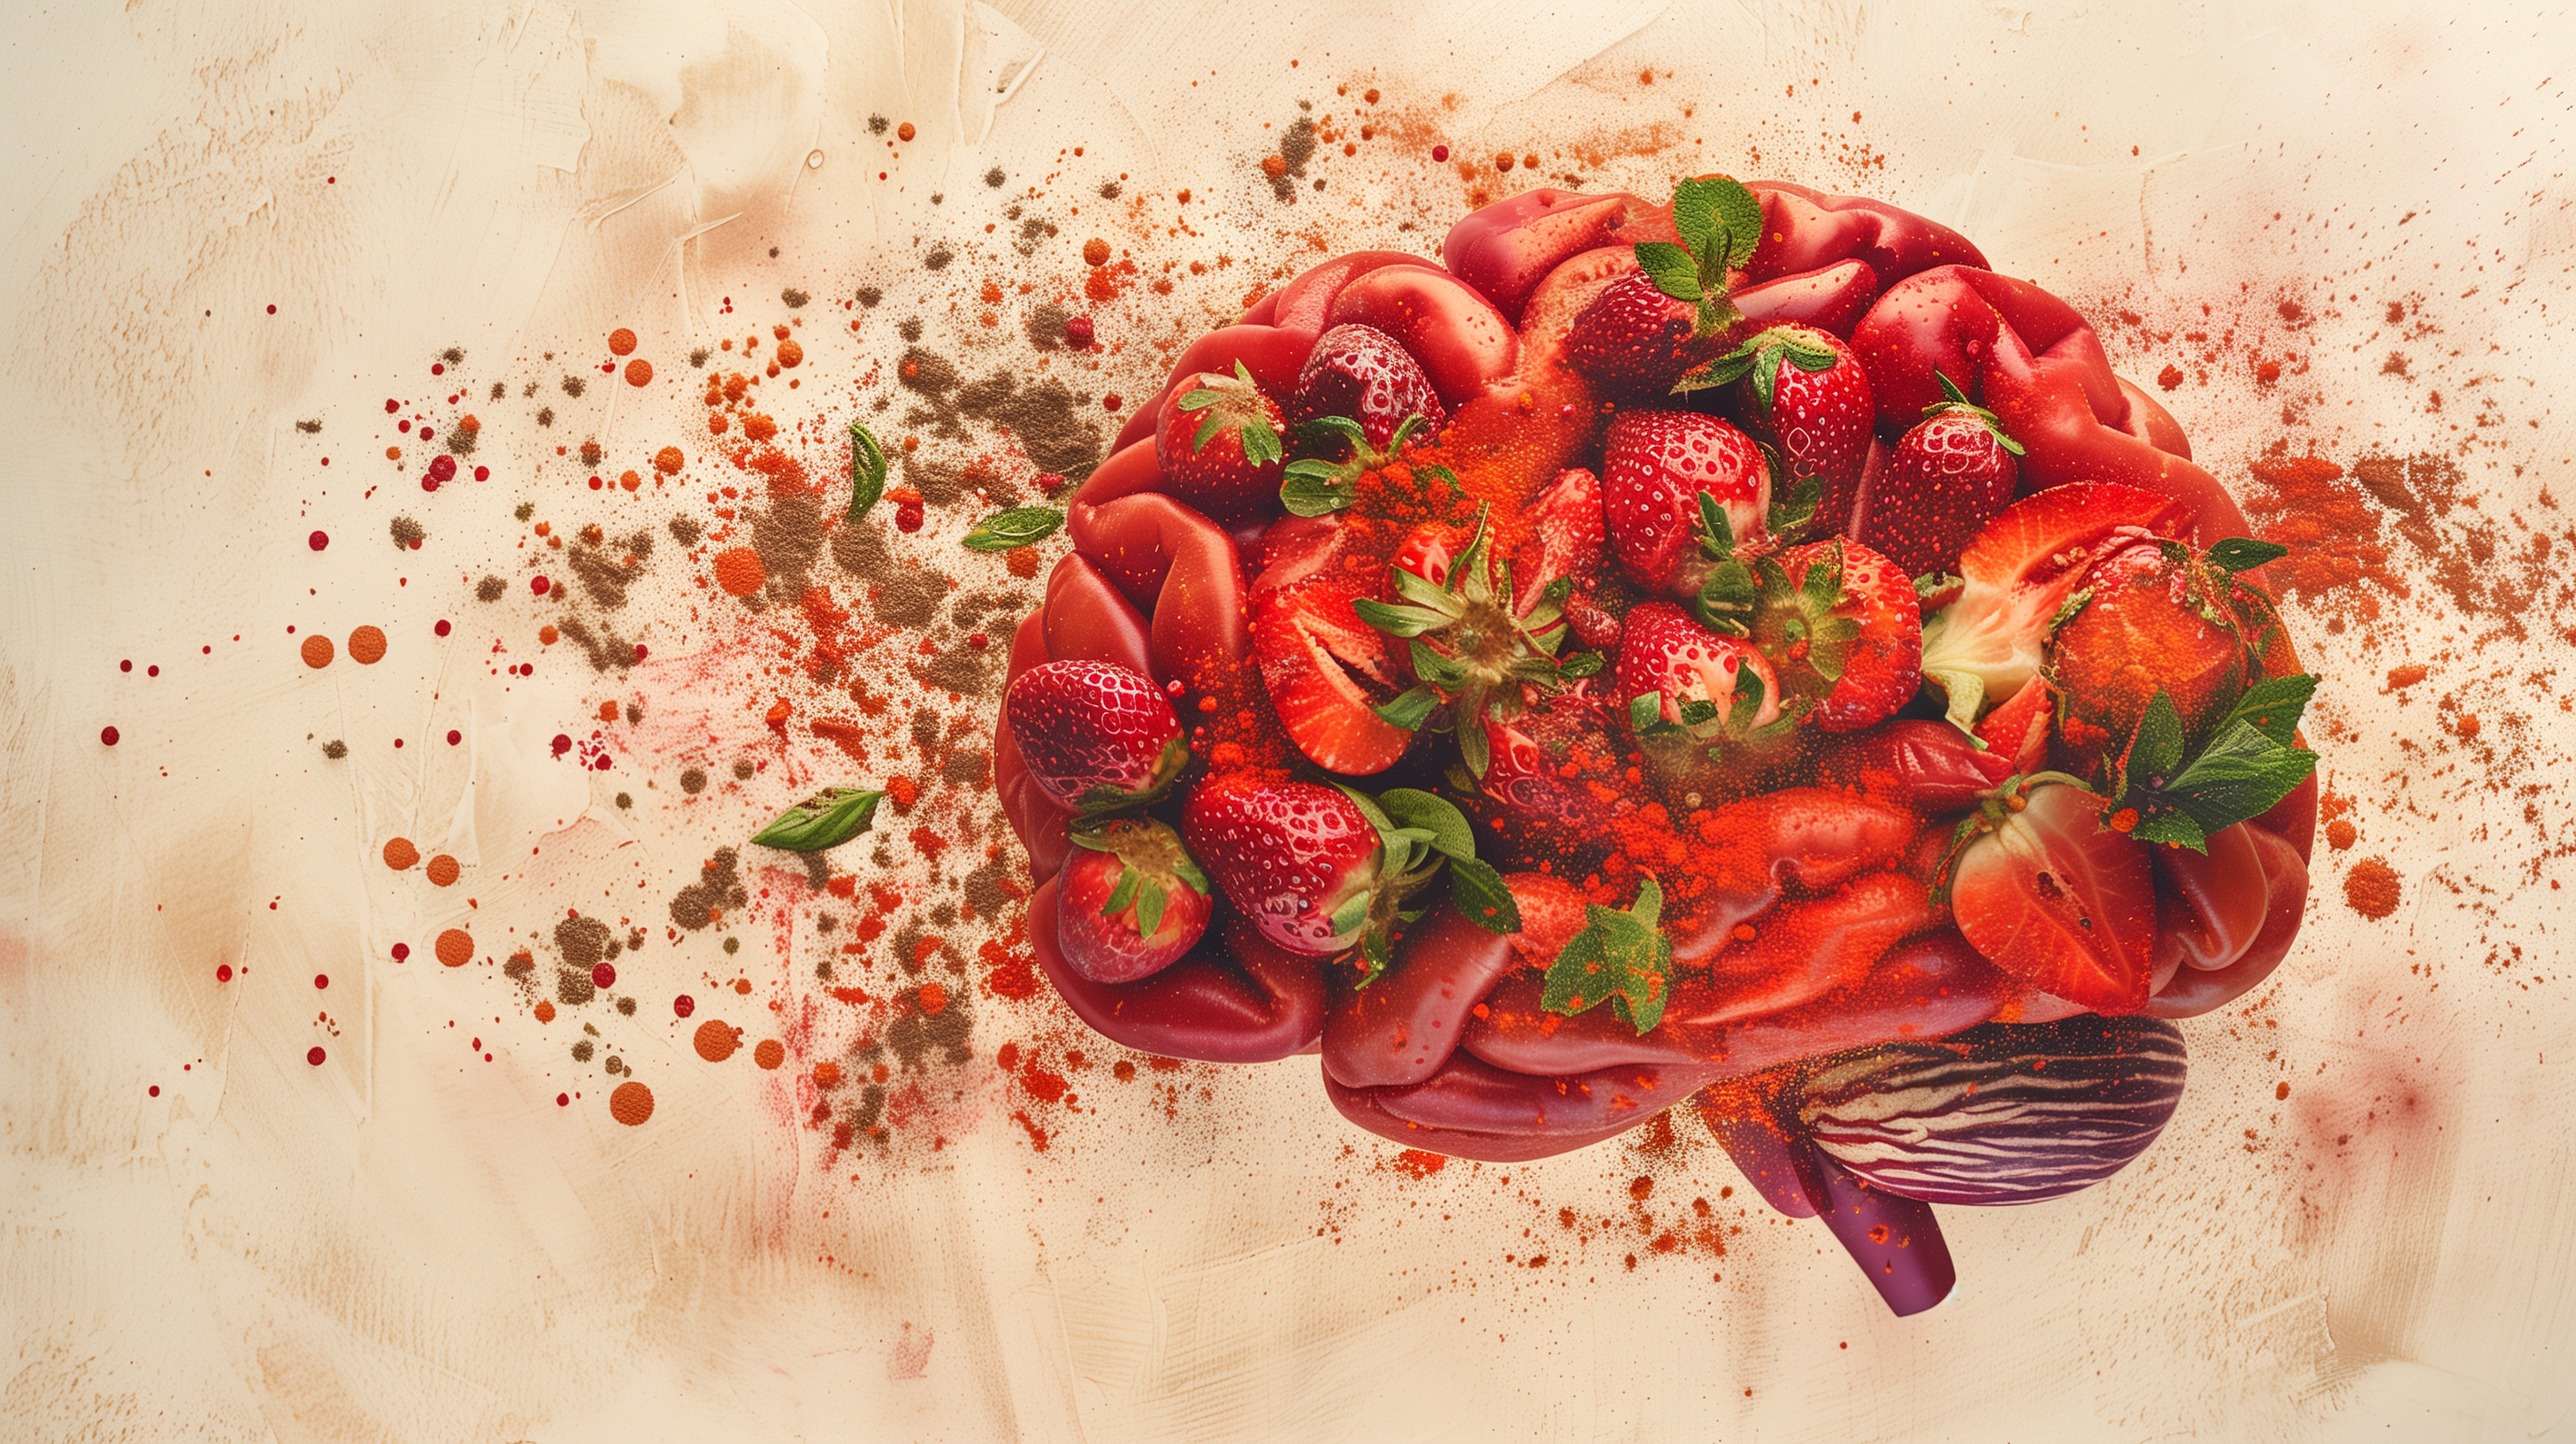 brain-shaped silhouette filled with vibrant red fruits and vegetables